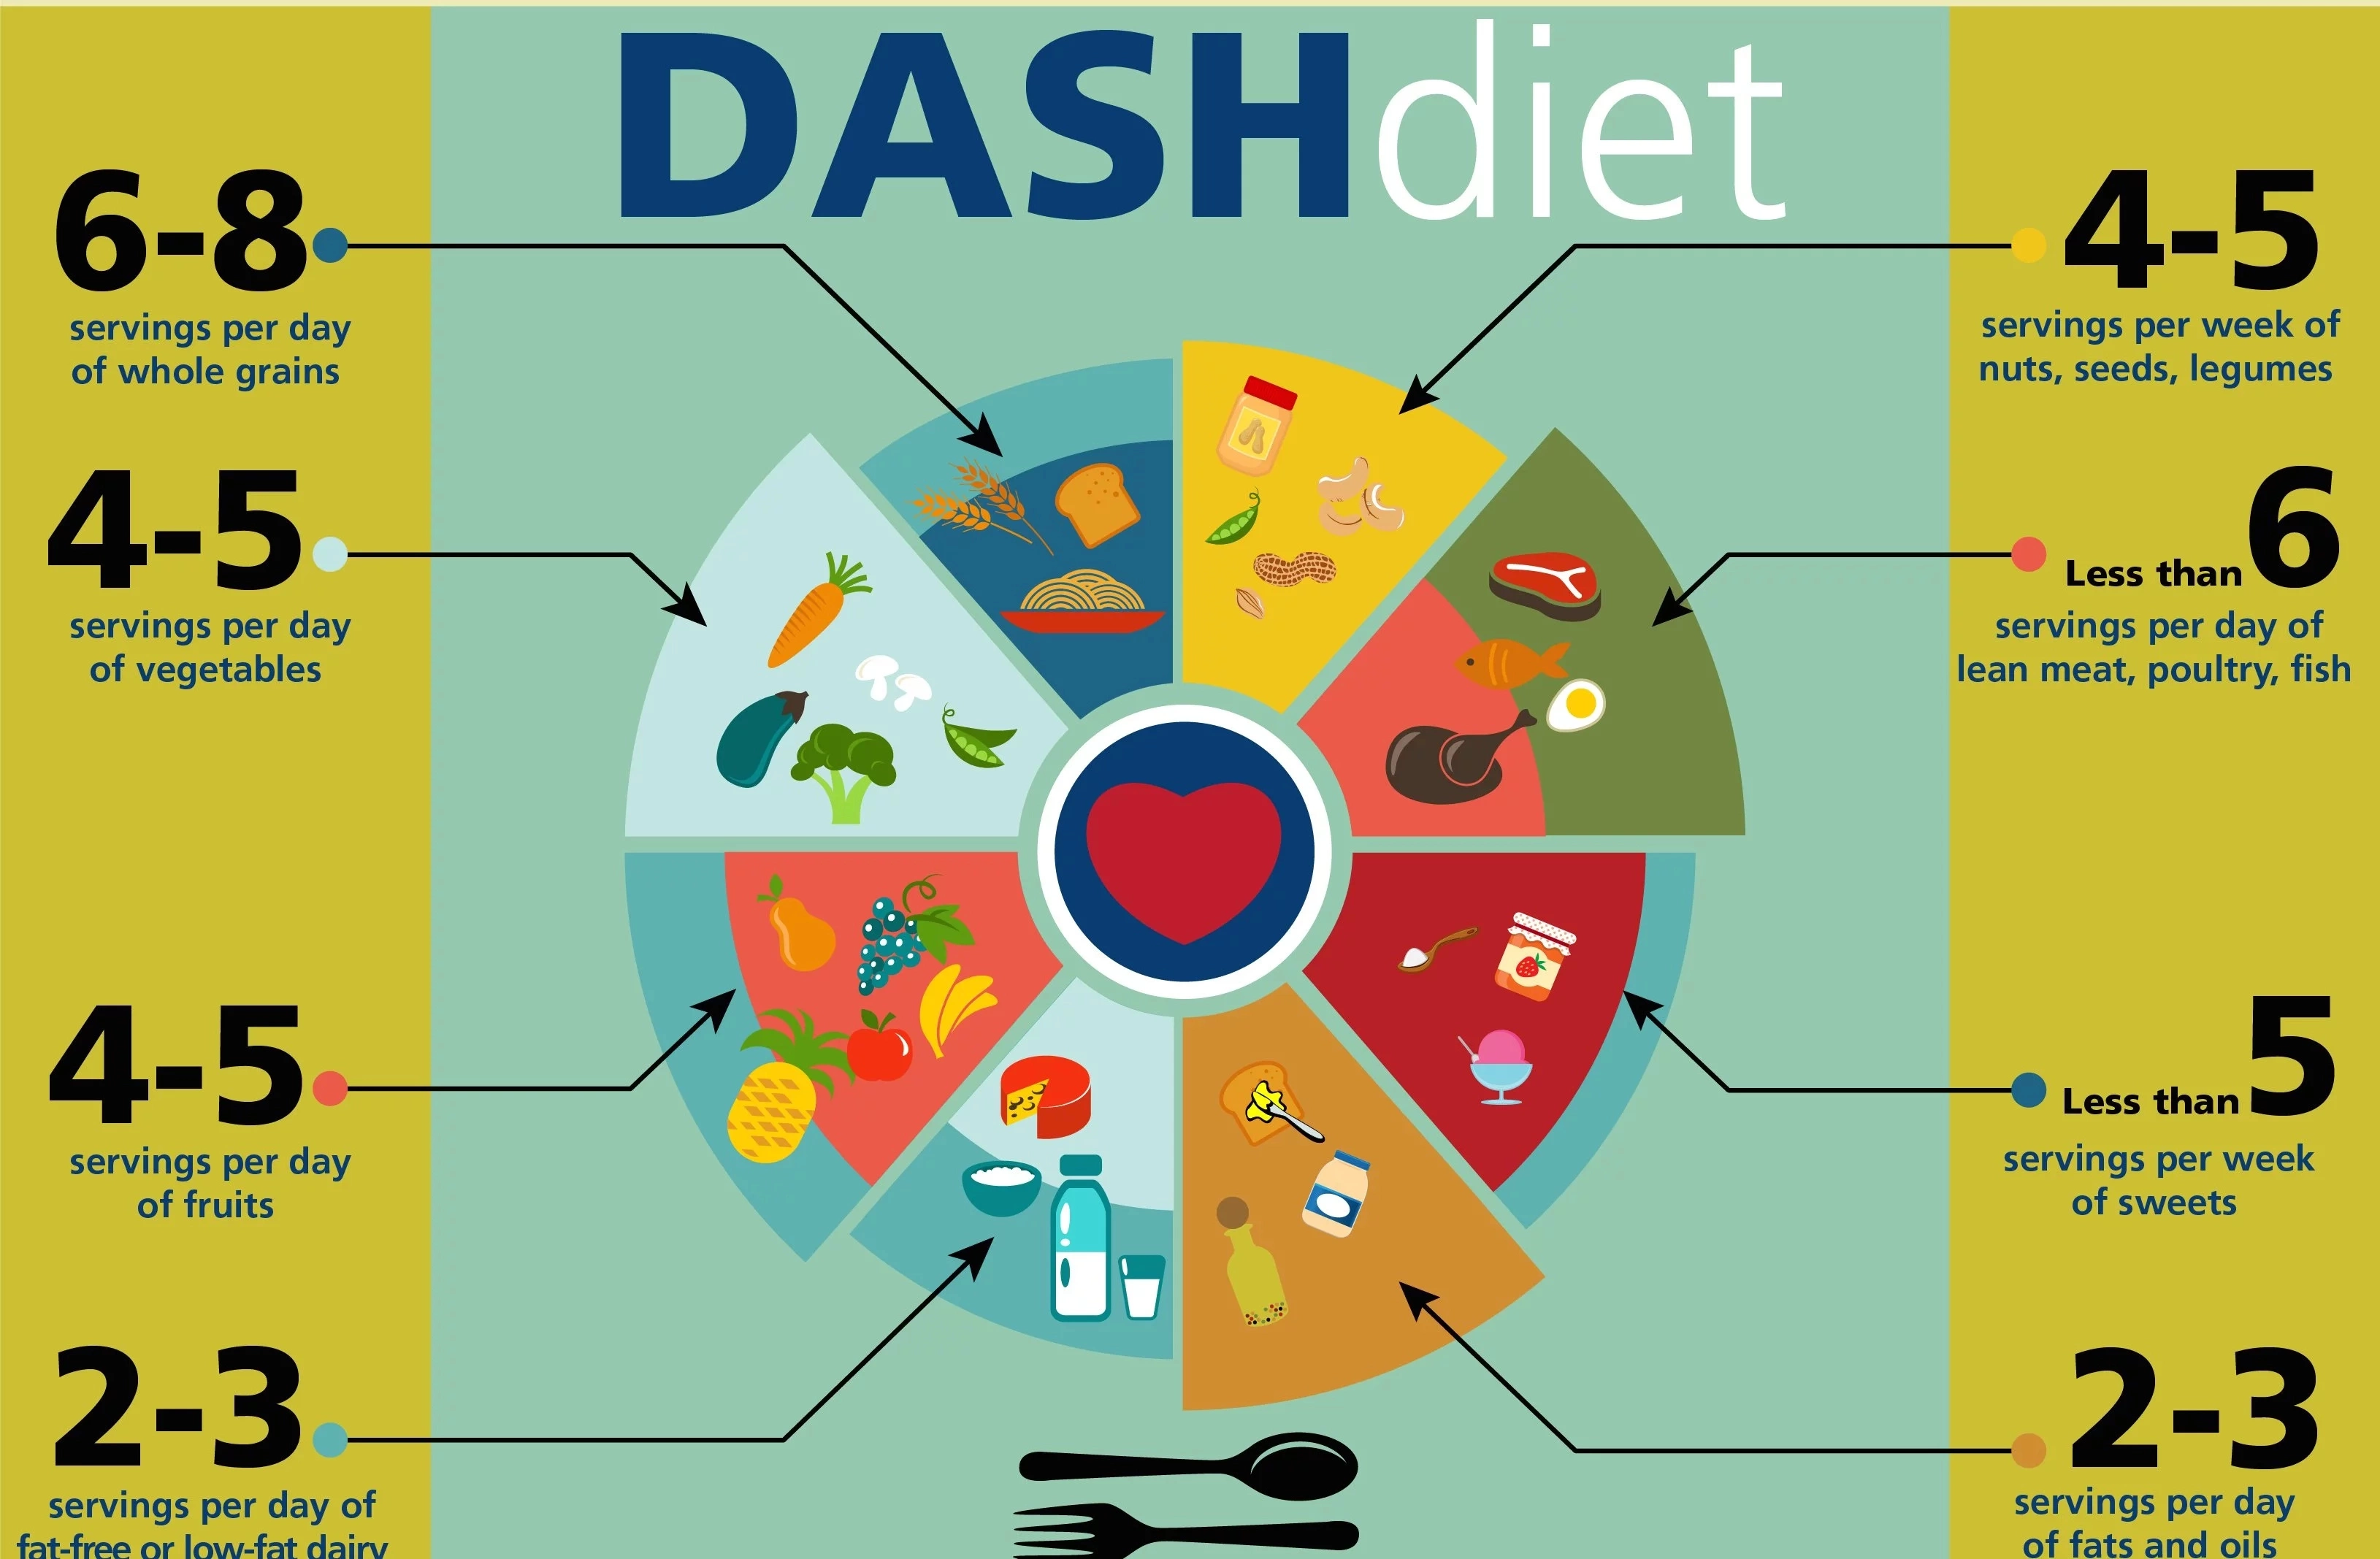 DASH eating plan chart showing the amounts of foods from each food group needed per day. 6 to 8 servings of whole grains, 4 to 5 servings of vegetables, 4-5 servings of fruit, 2-3 servings of low-fat dairy, 4-5 servings per week of nuts, seeds, legumes. less than 6 servings per day of lean meat, poultry, fish. Les than 5 servings per week of sweets. 2-3 servings per day of fats and oils